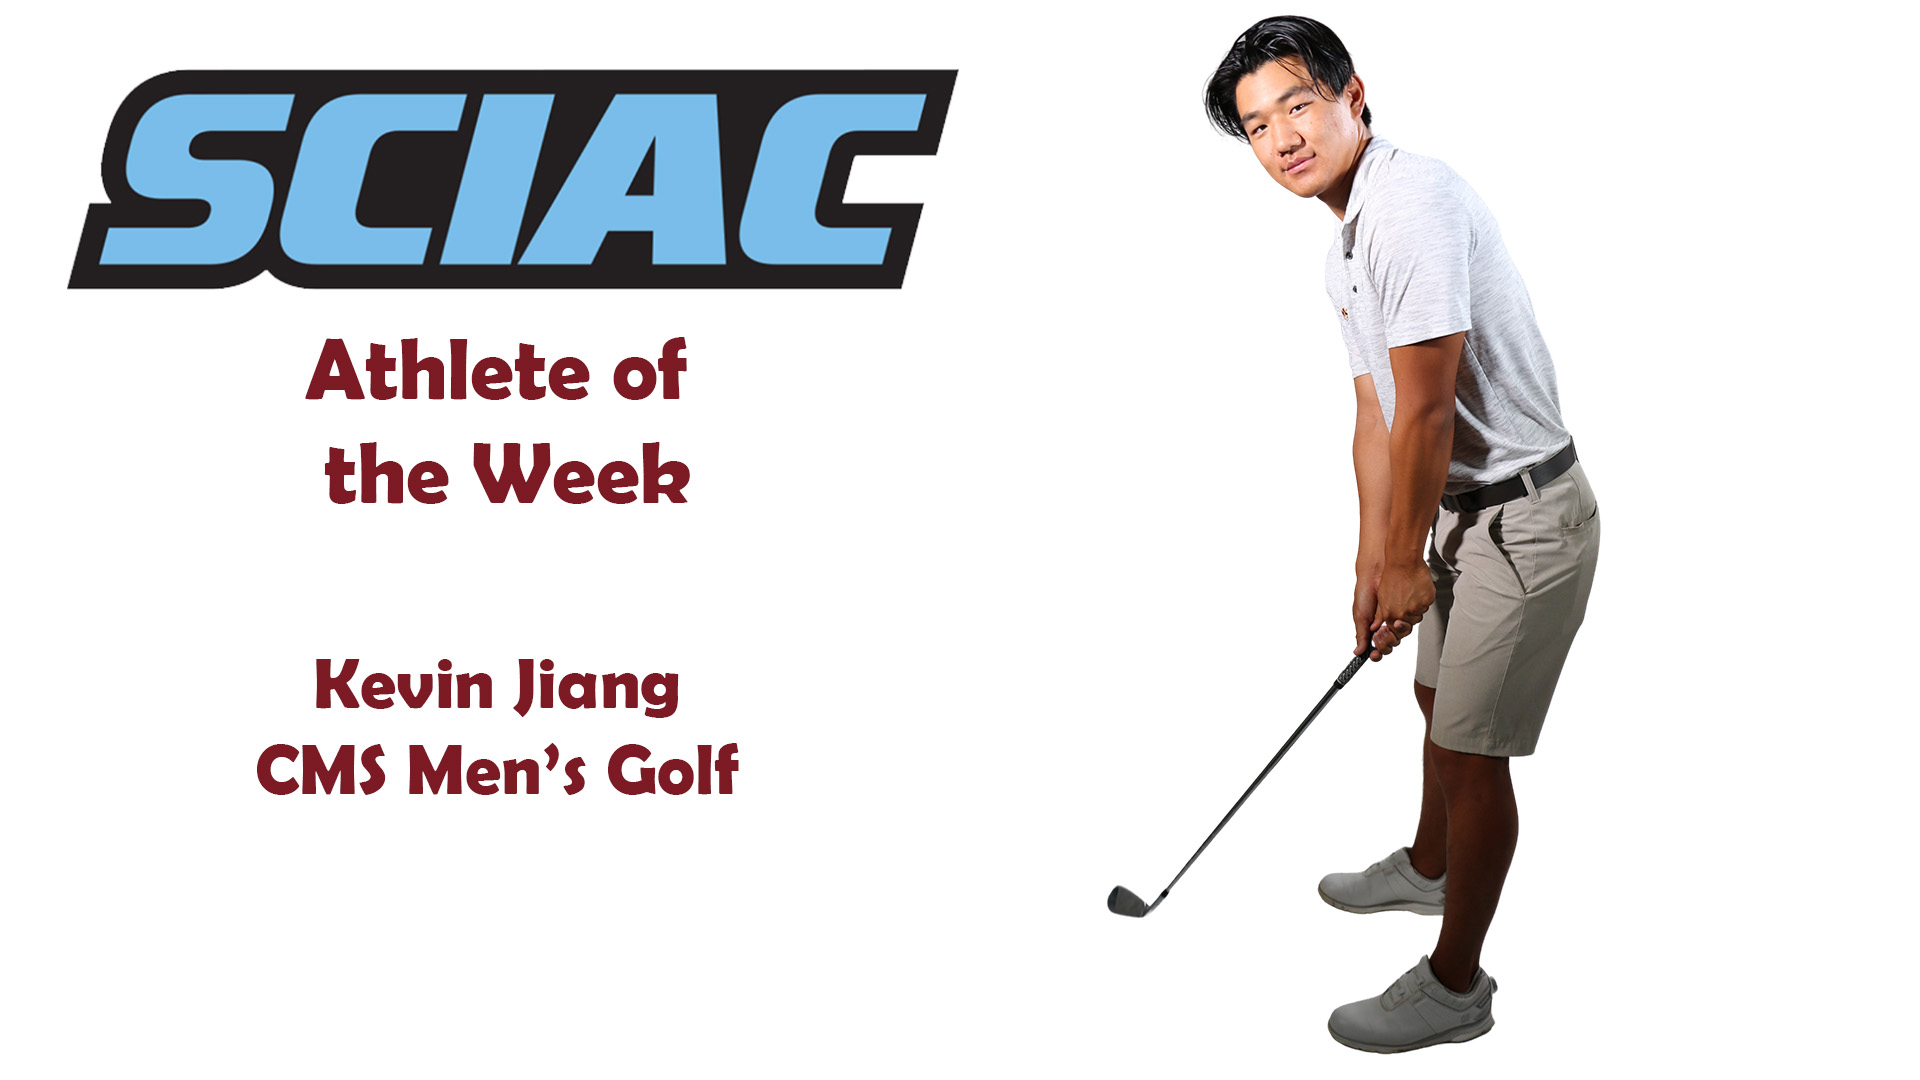 Posed shot of Kevin Jiang with SCIAC logo